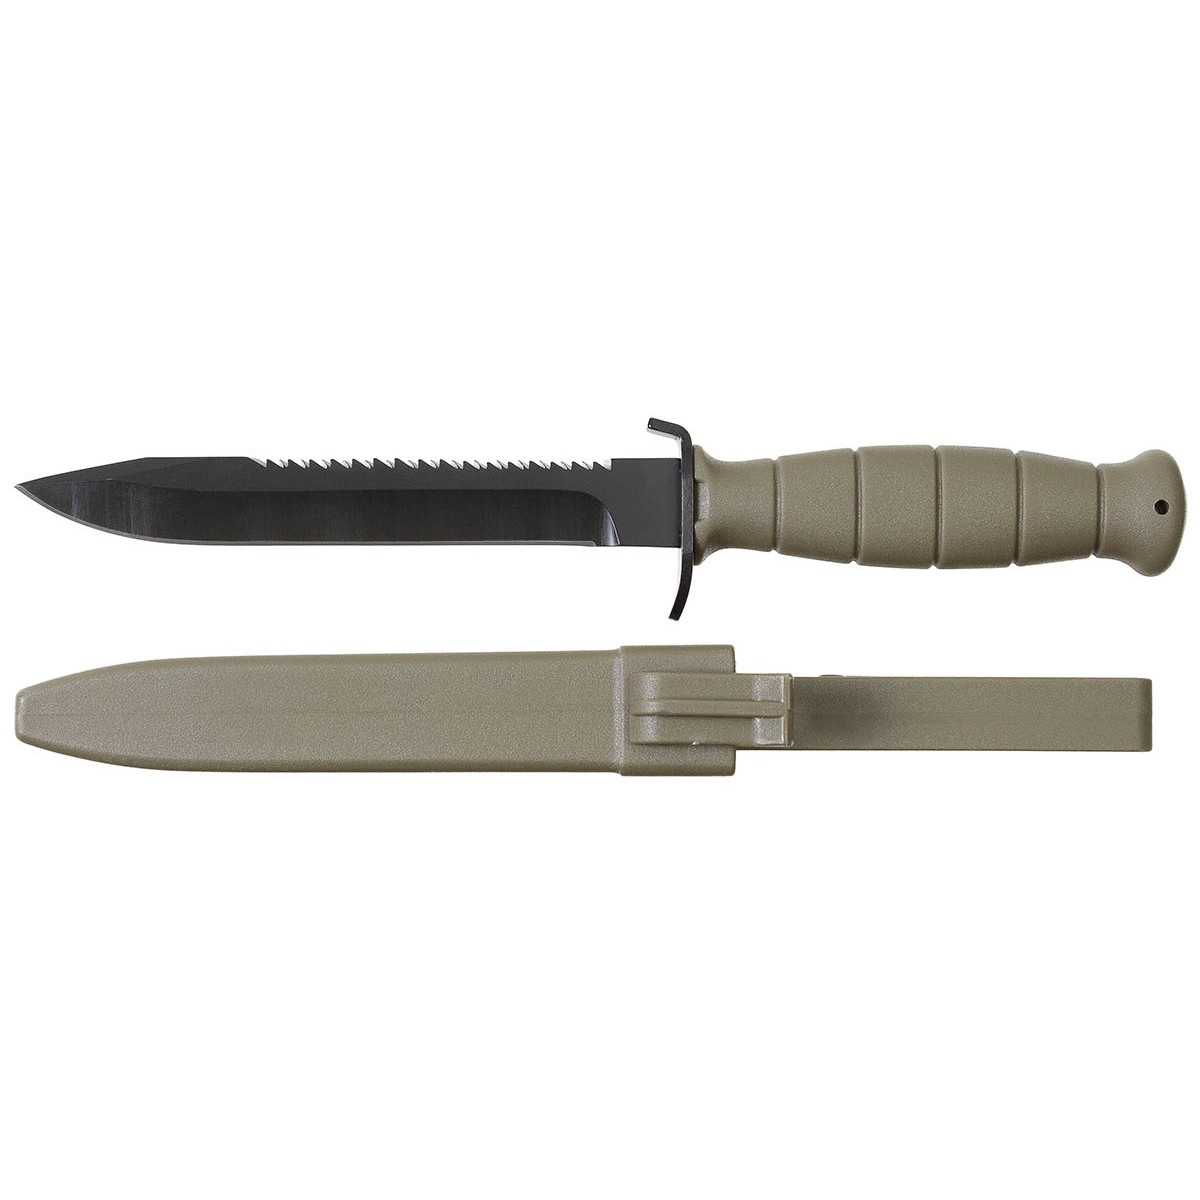 MFH Austrian Armed Forces field knife with saw back - OD